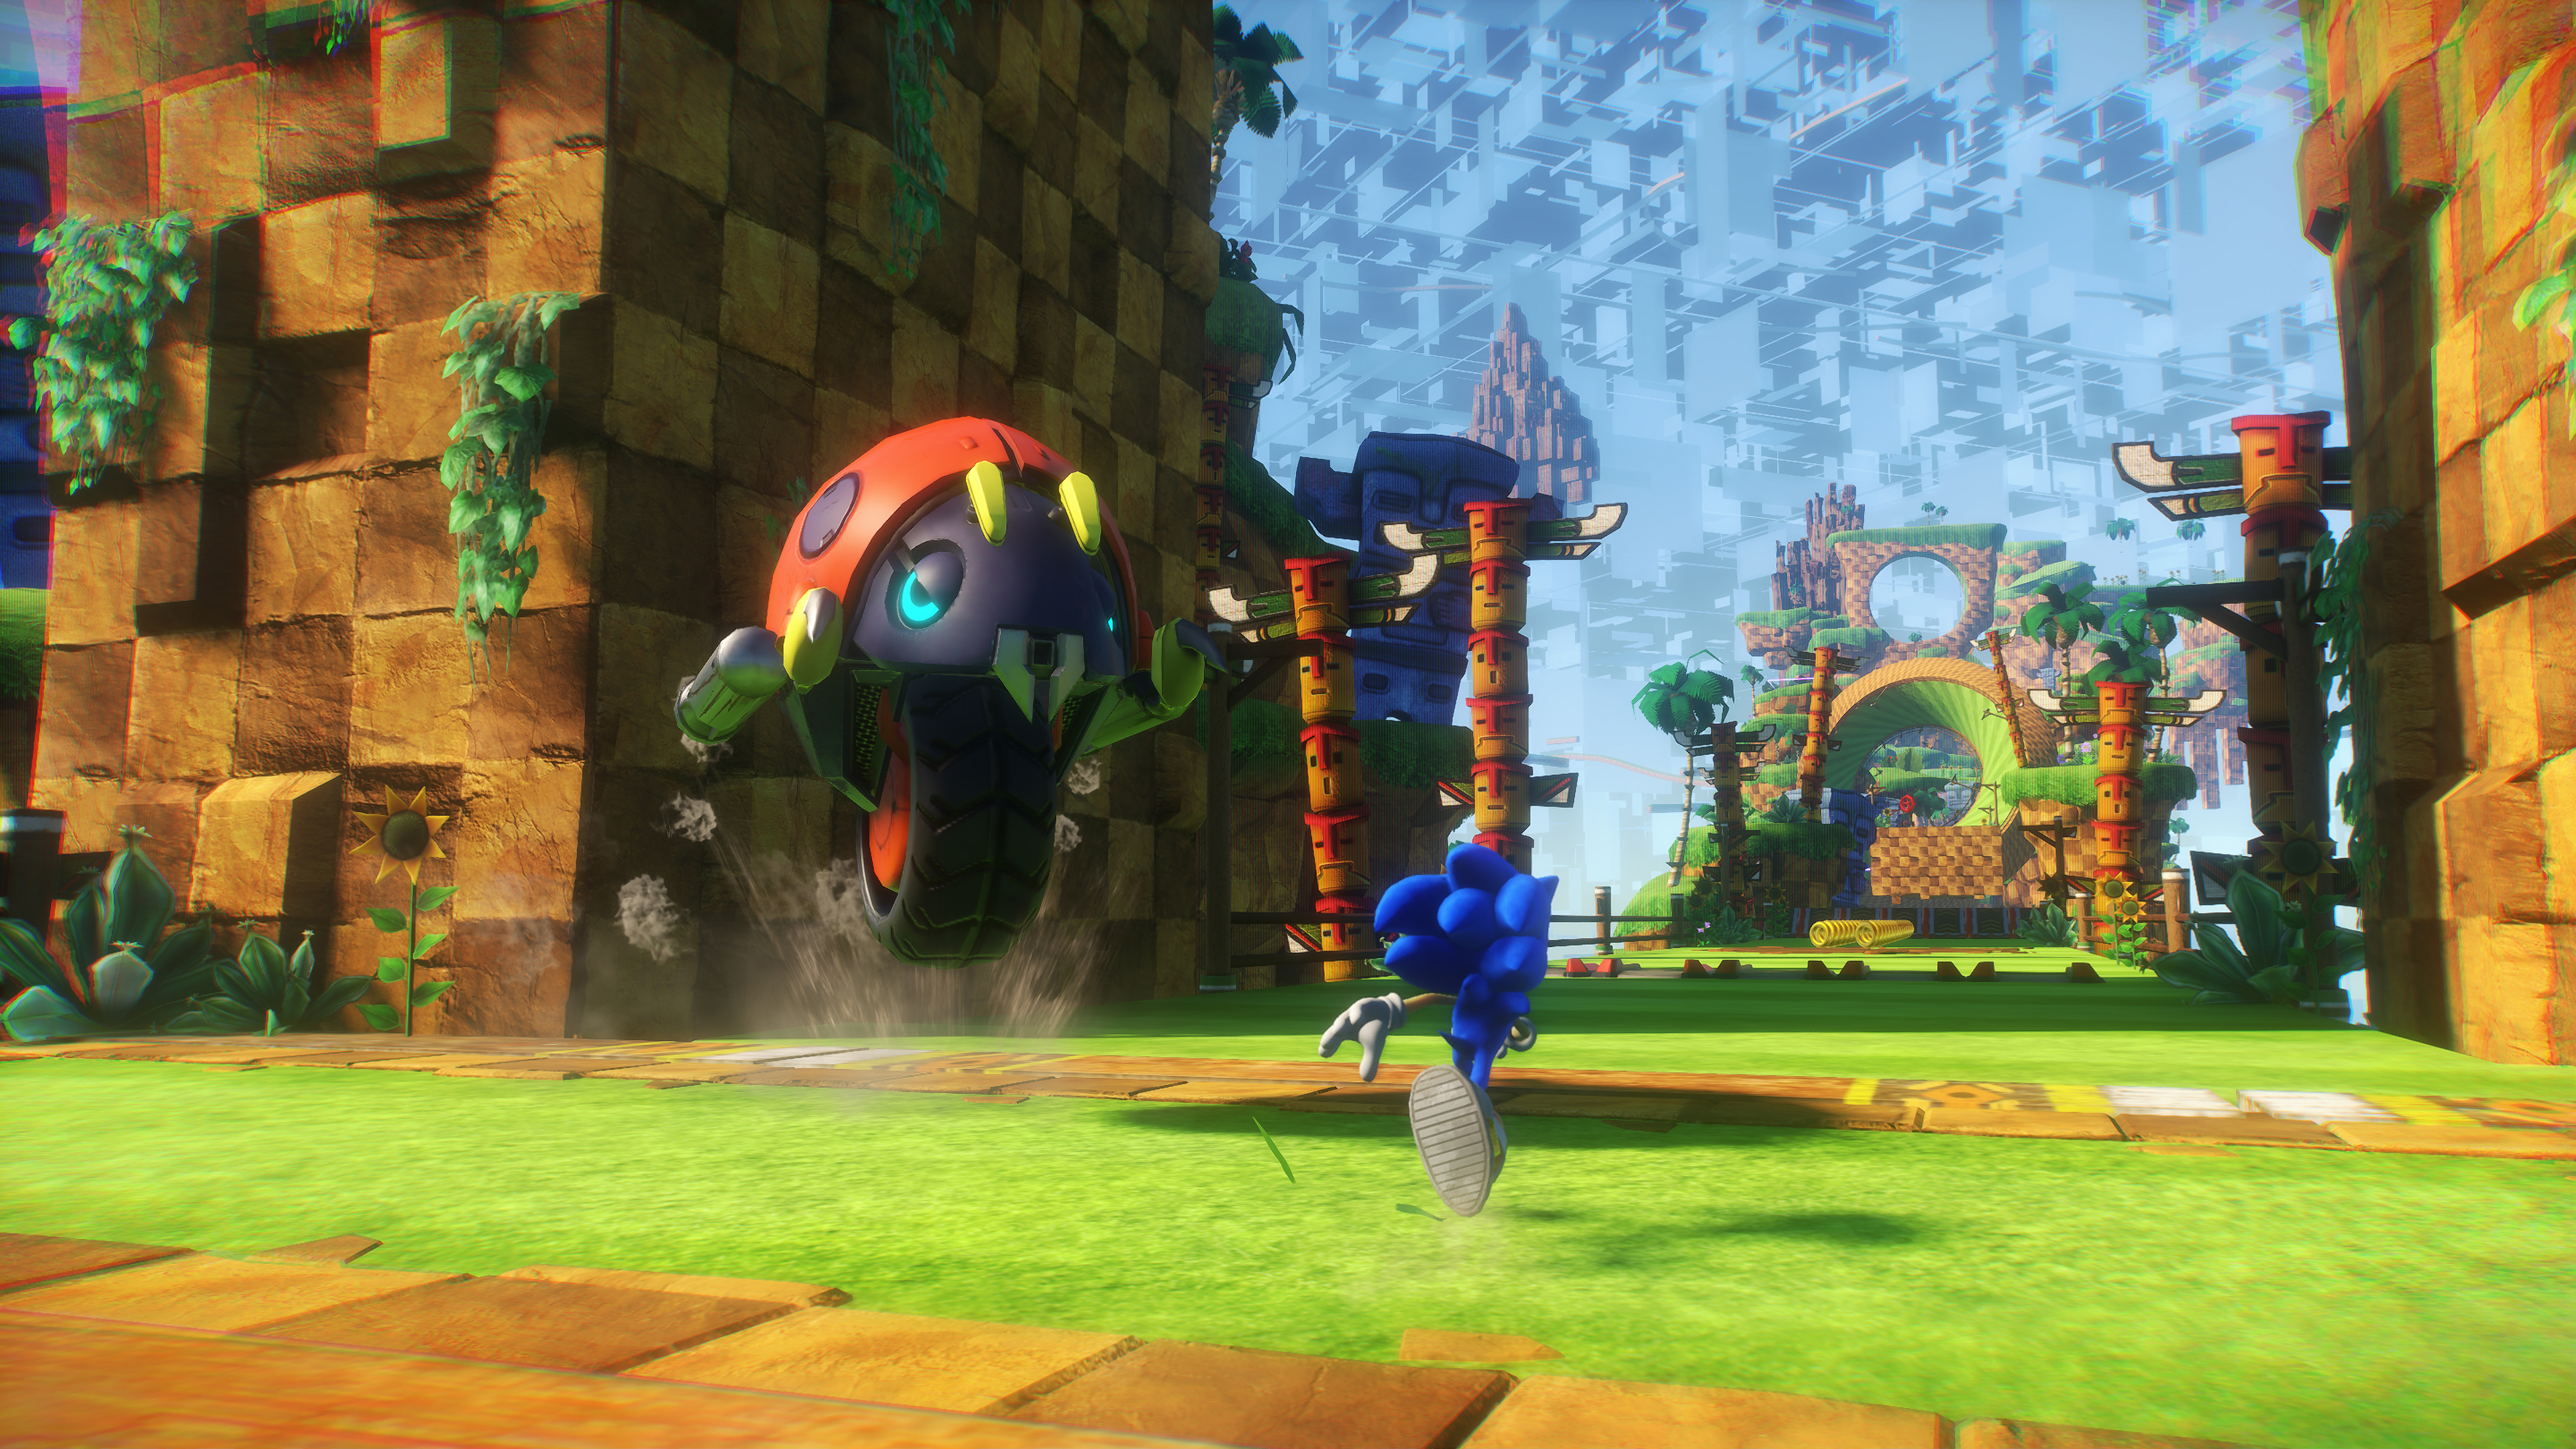 Sonic the Hedgehog runs through a 3D Green Hill Zone-like world in Sonic Frontiers